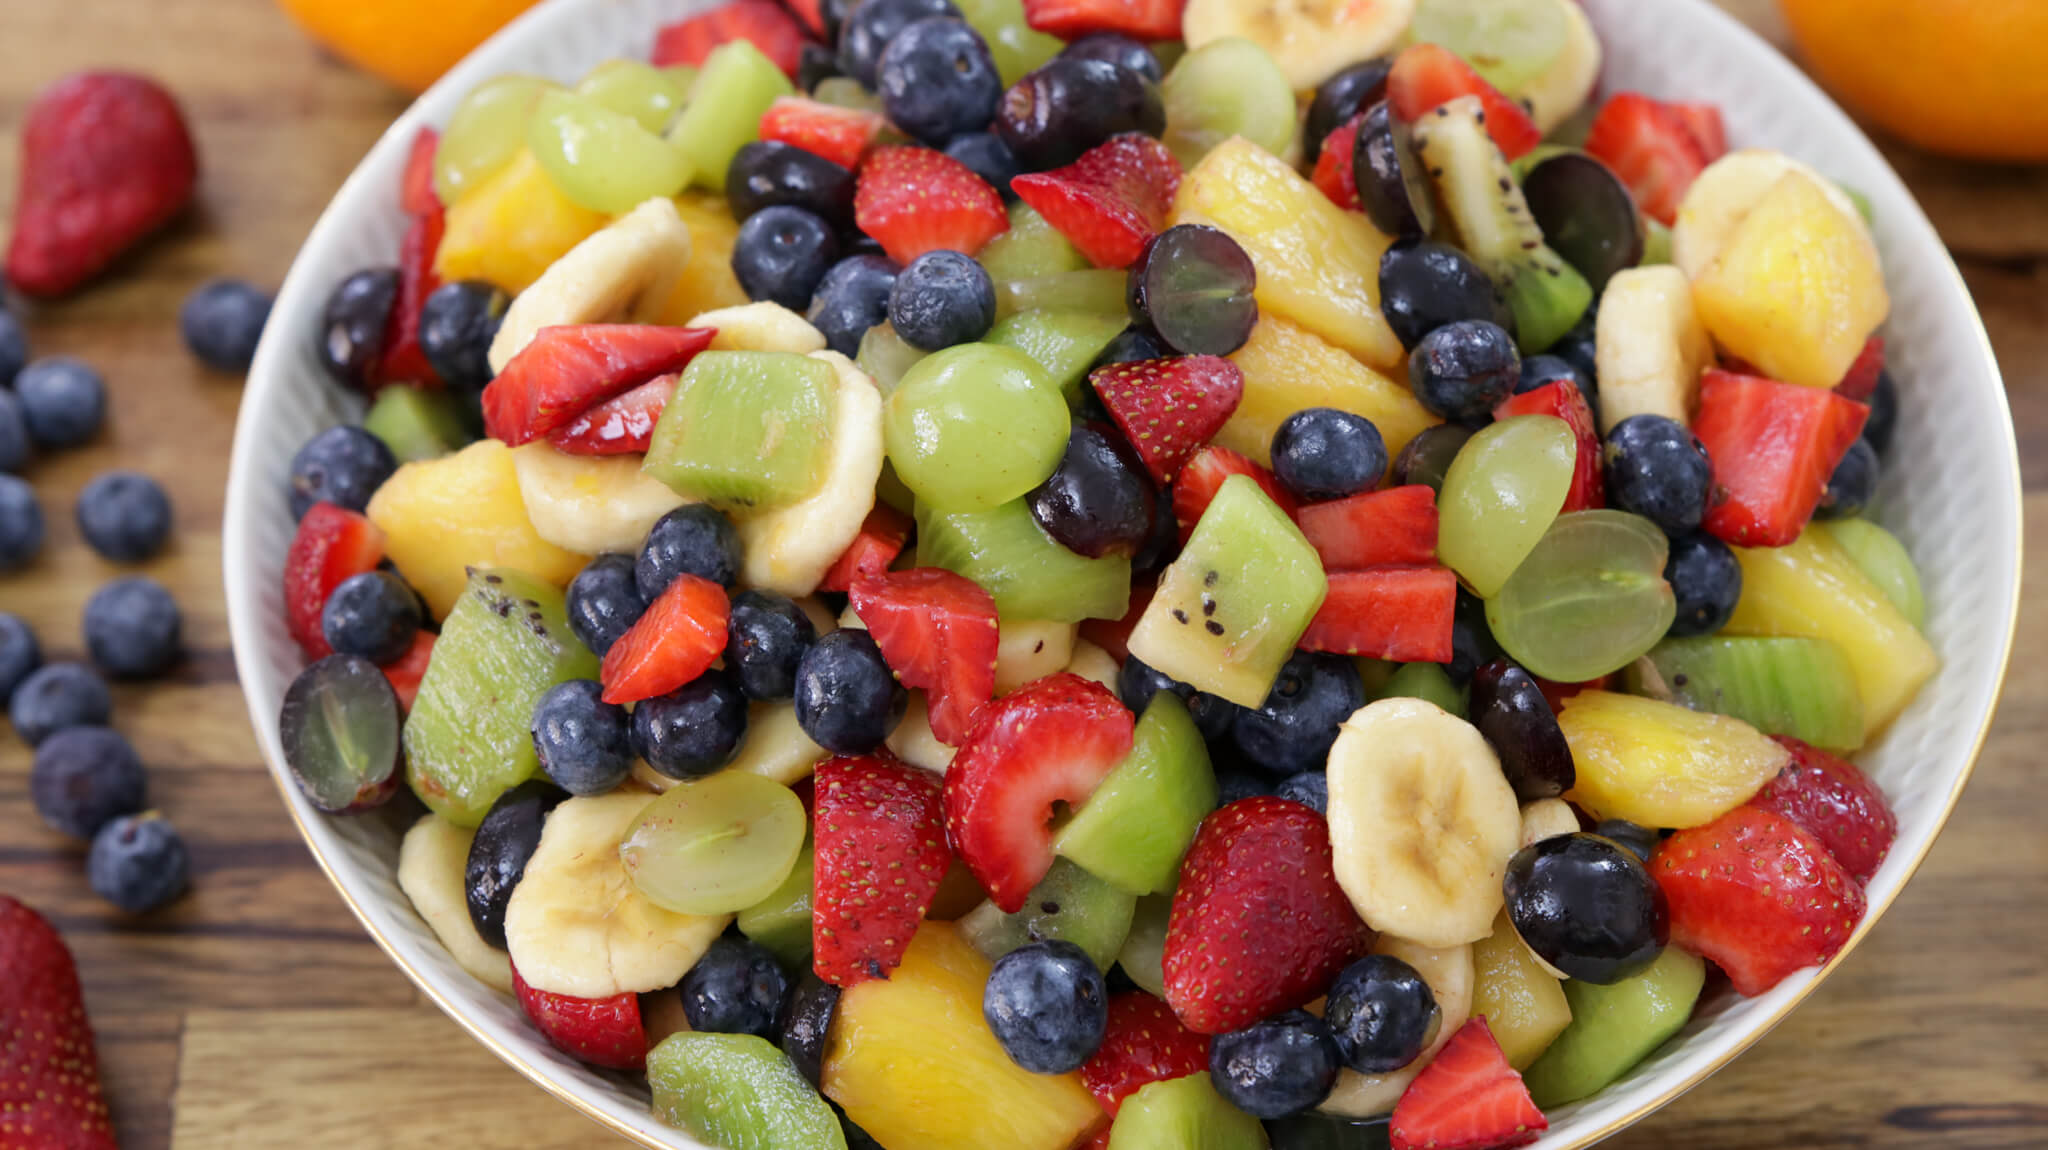 Fruit Salad Recipe - The Cooking Foodie